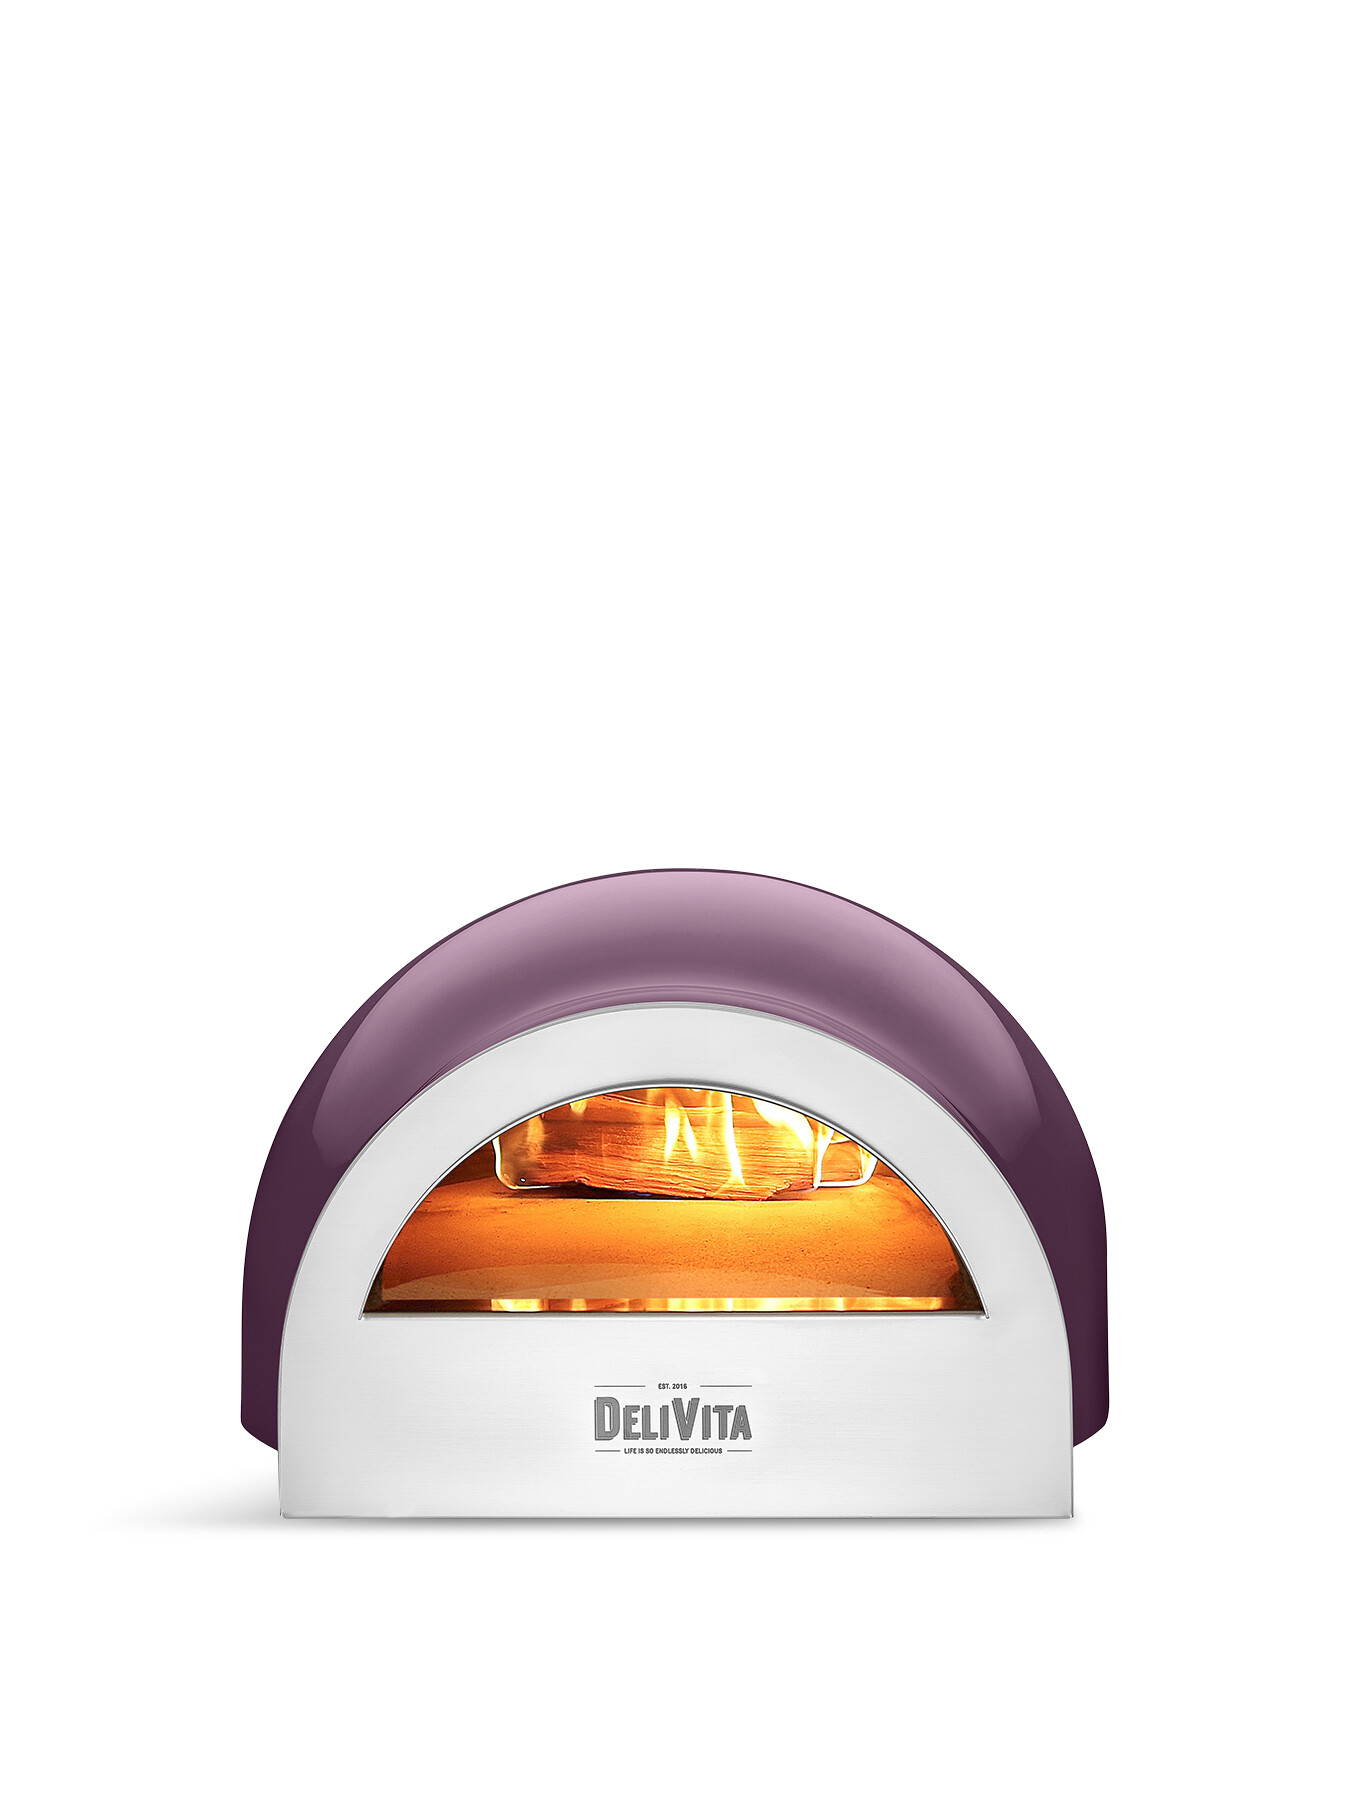 Delivita Wood-fired Oven Pink In Purple